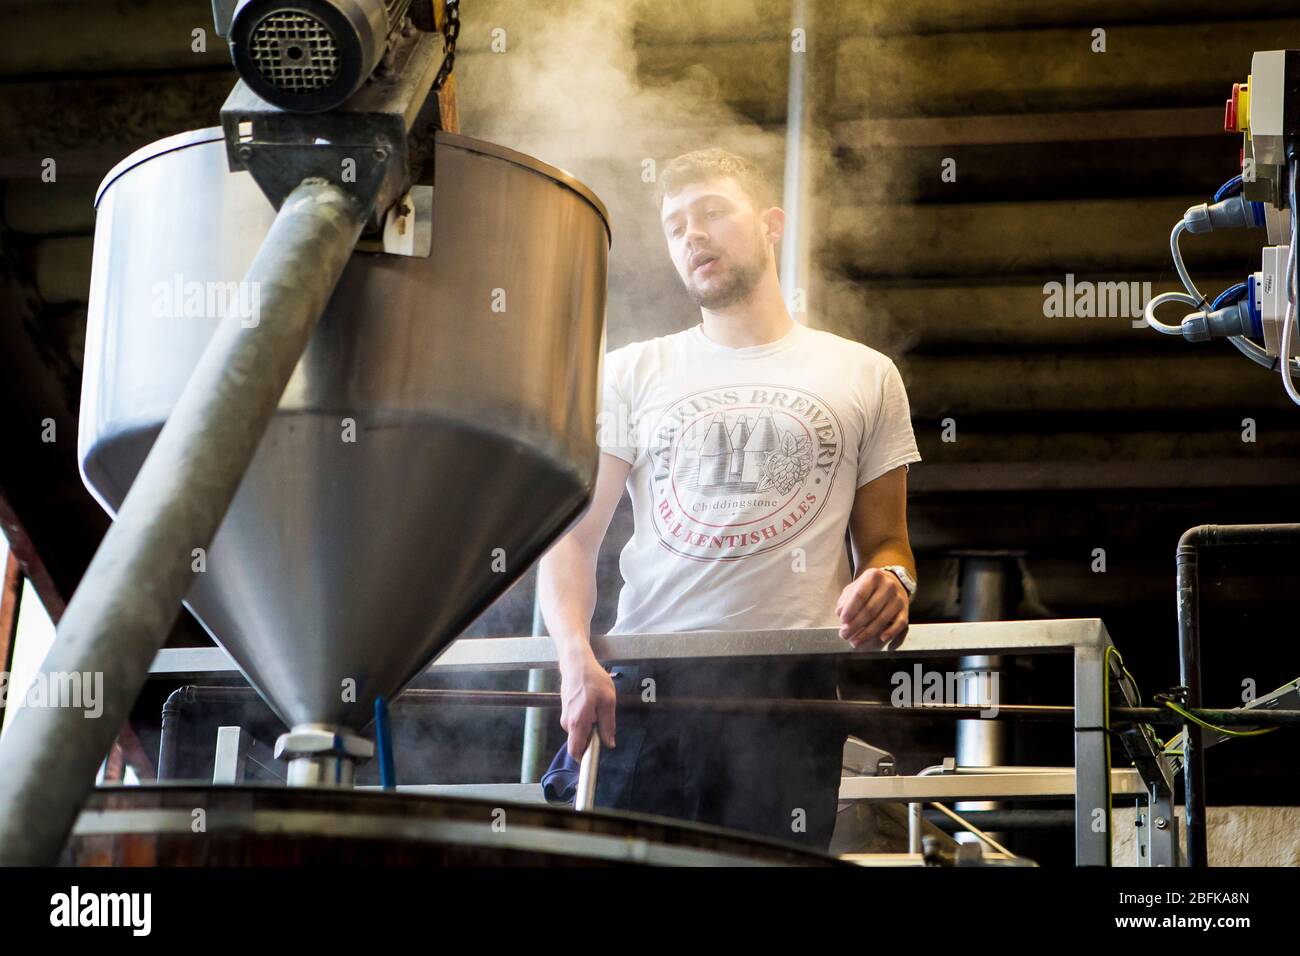 Master brewer Chris Taylor brewing beer at Larkins Brewery award winning brewery and hop farm in Chiddingstone, Kent, UK Stock Photo